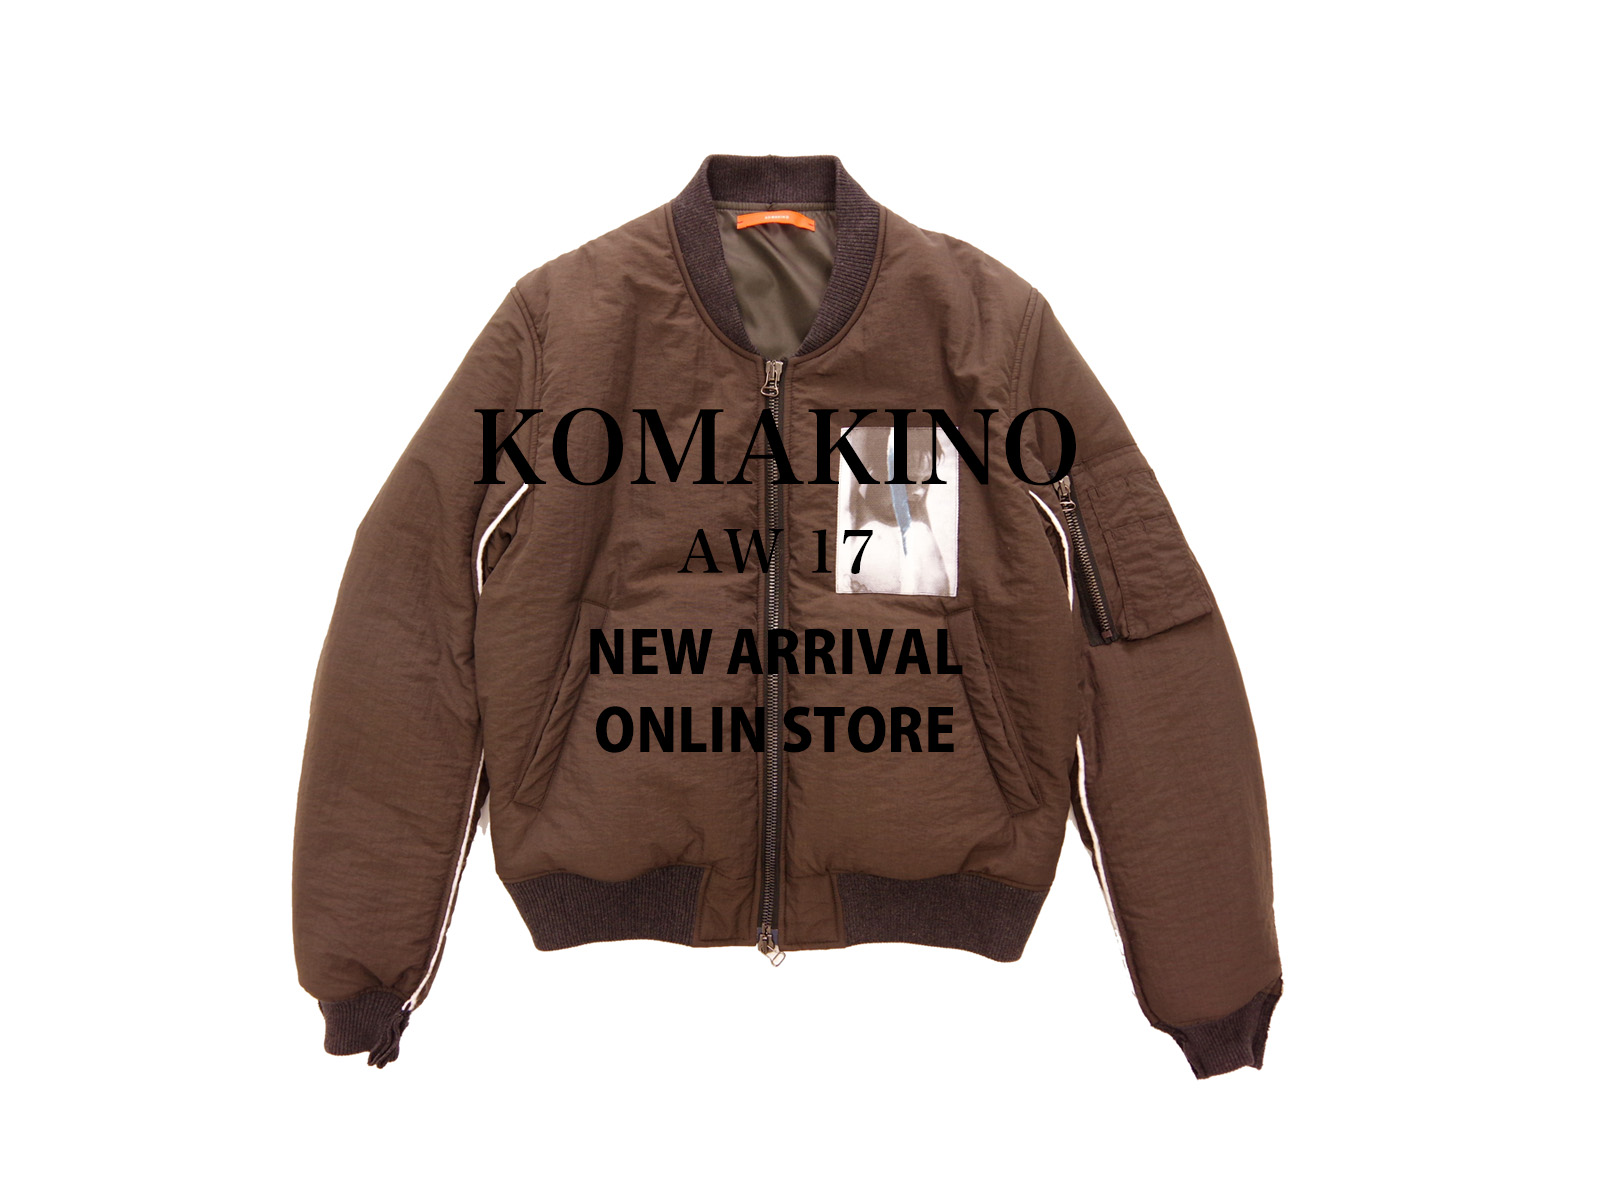 KOMAKINO AW17 NEW ARRIVAL ONLINE STORE